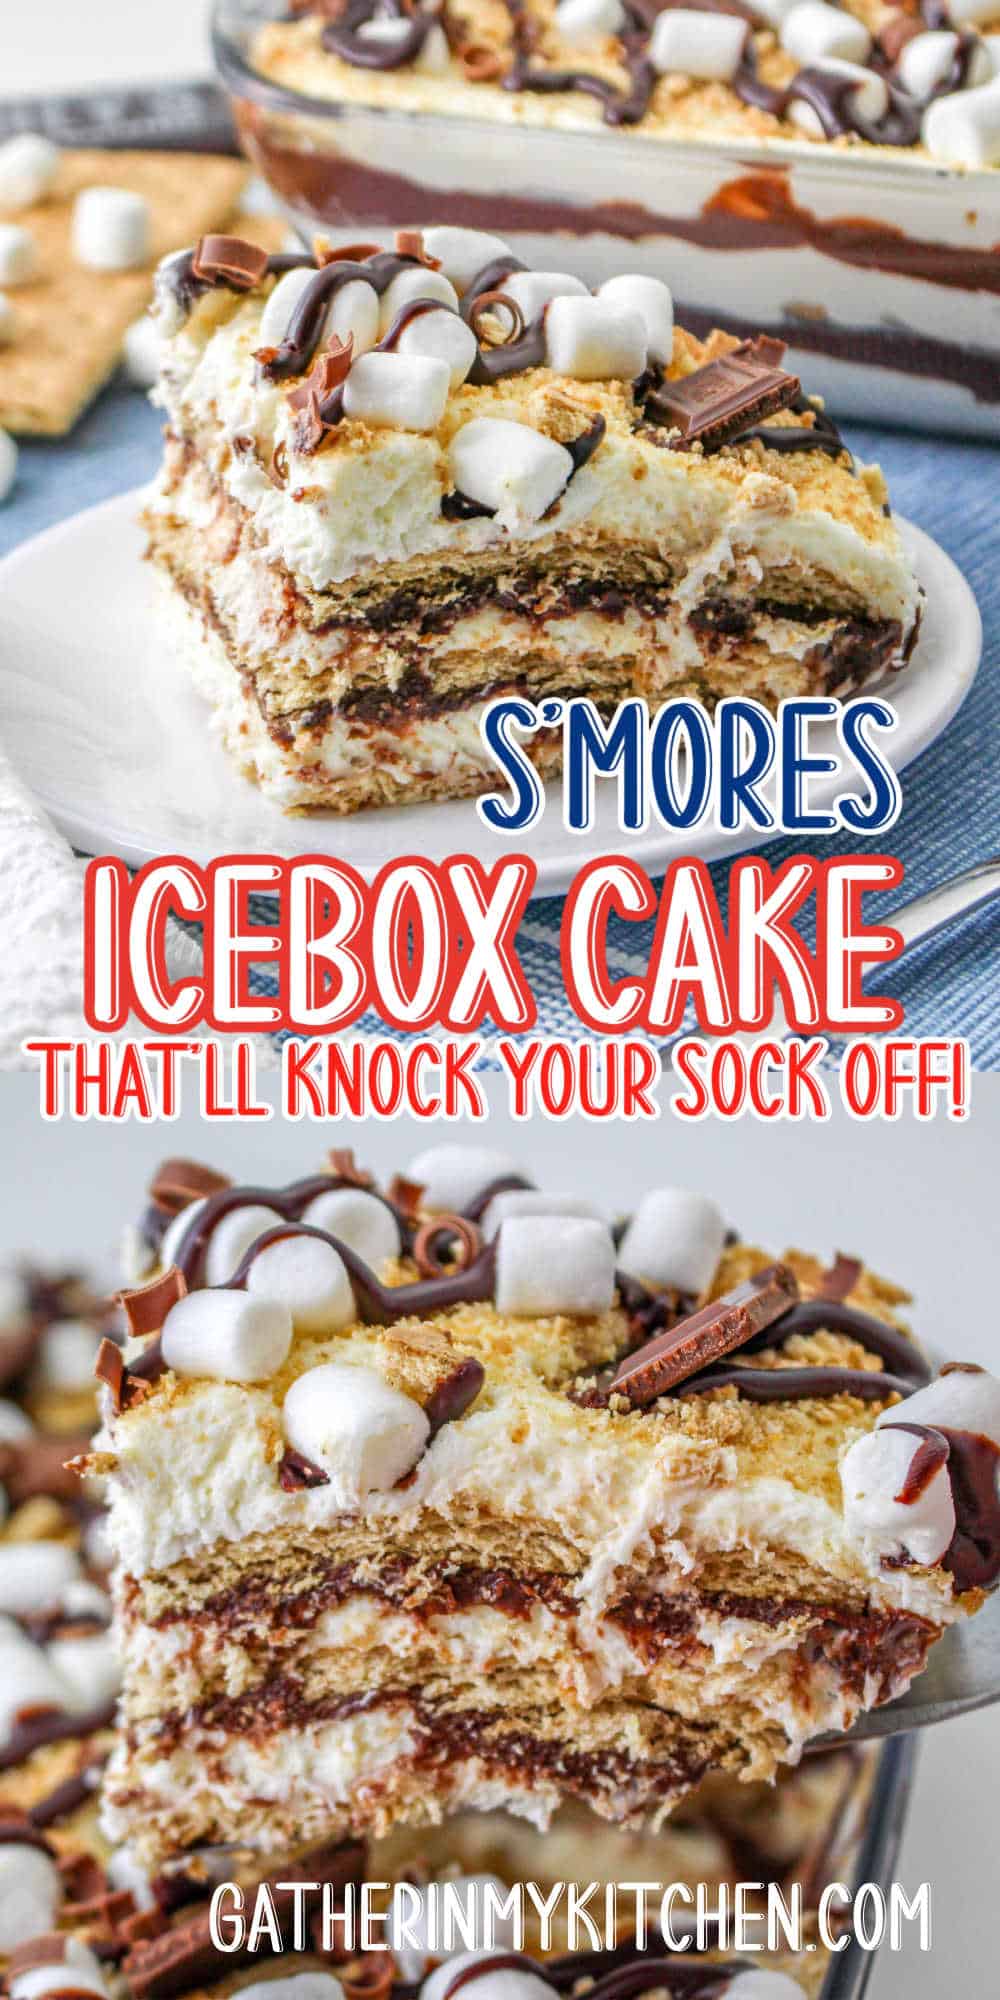 Pin image: top has a pic of a piece of S'mores Icebox cake on a plate, middle says S'mores icebox cake that'll knock your socks off" and bottom has a piece being lifted out of the baking dish.